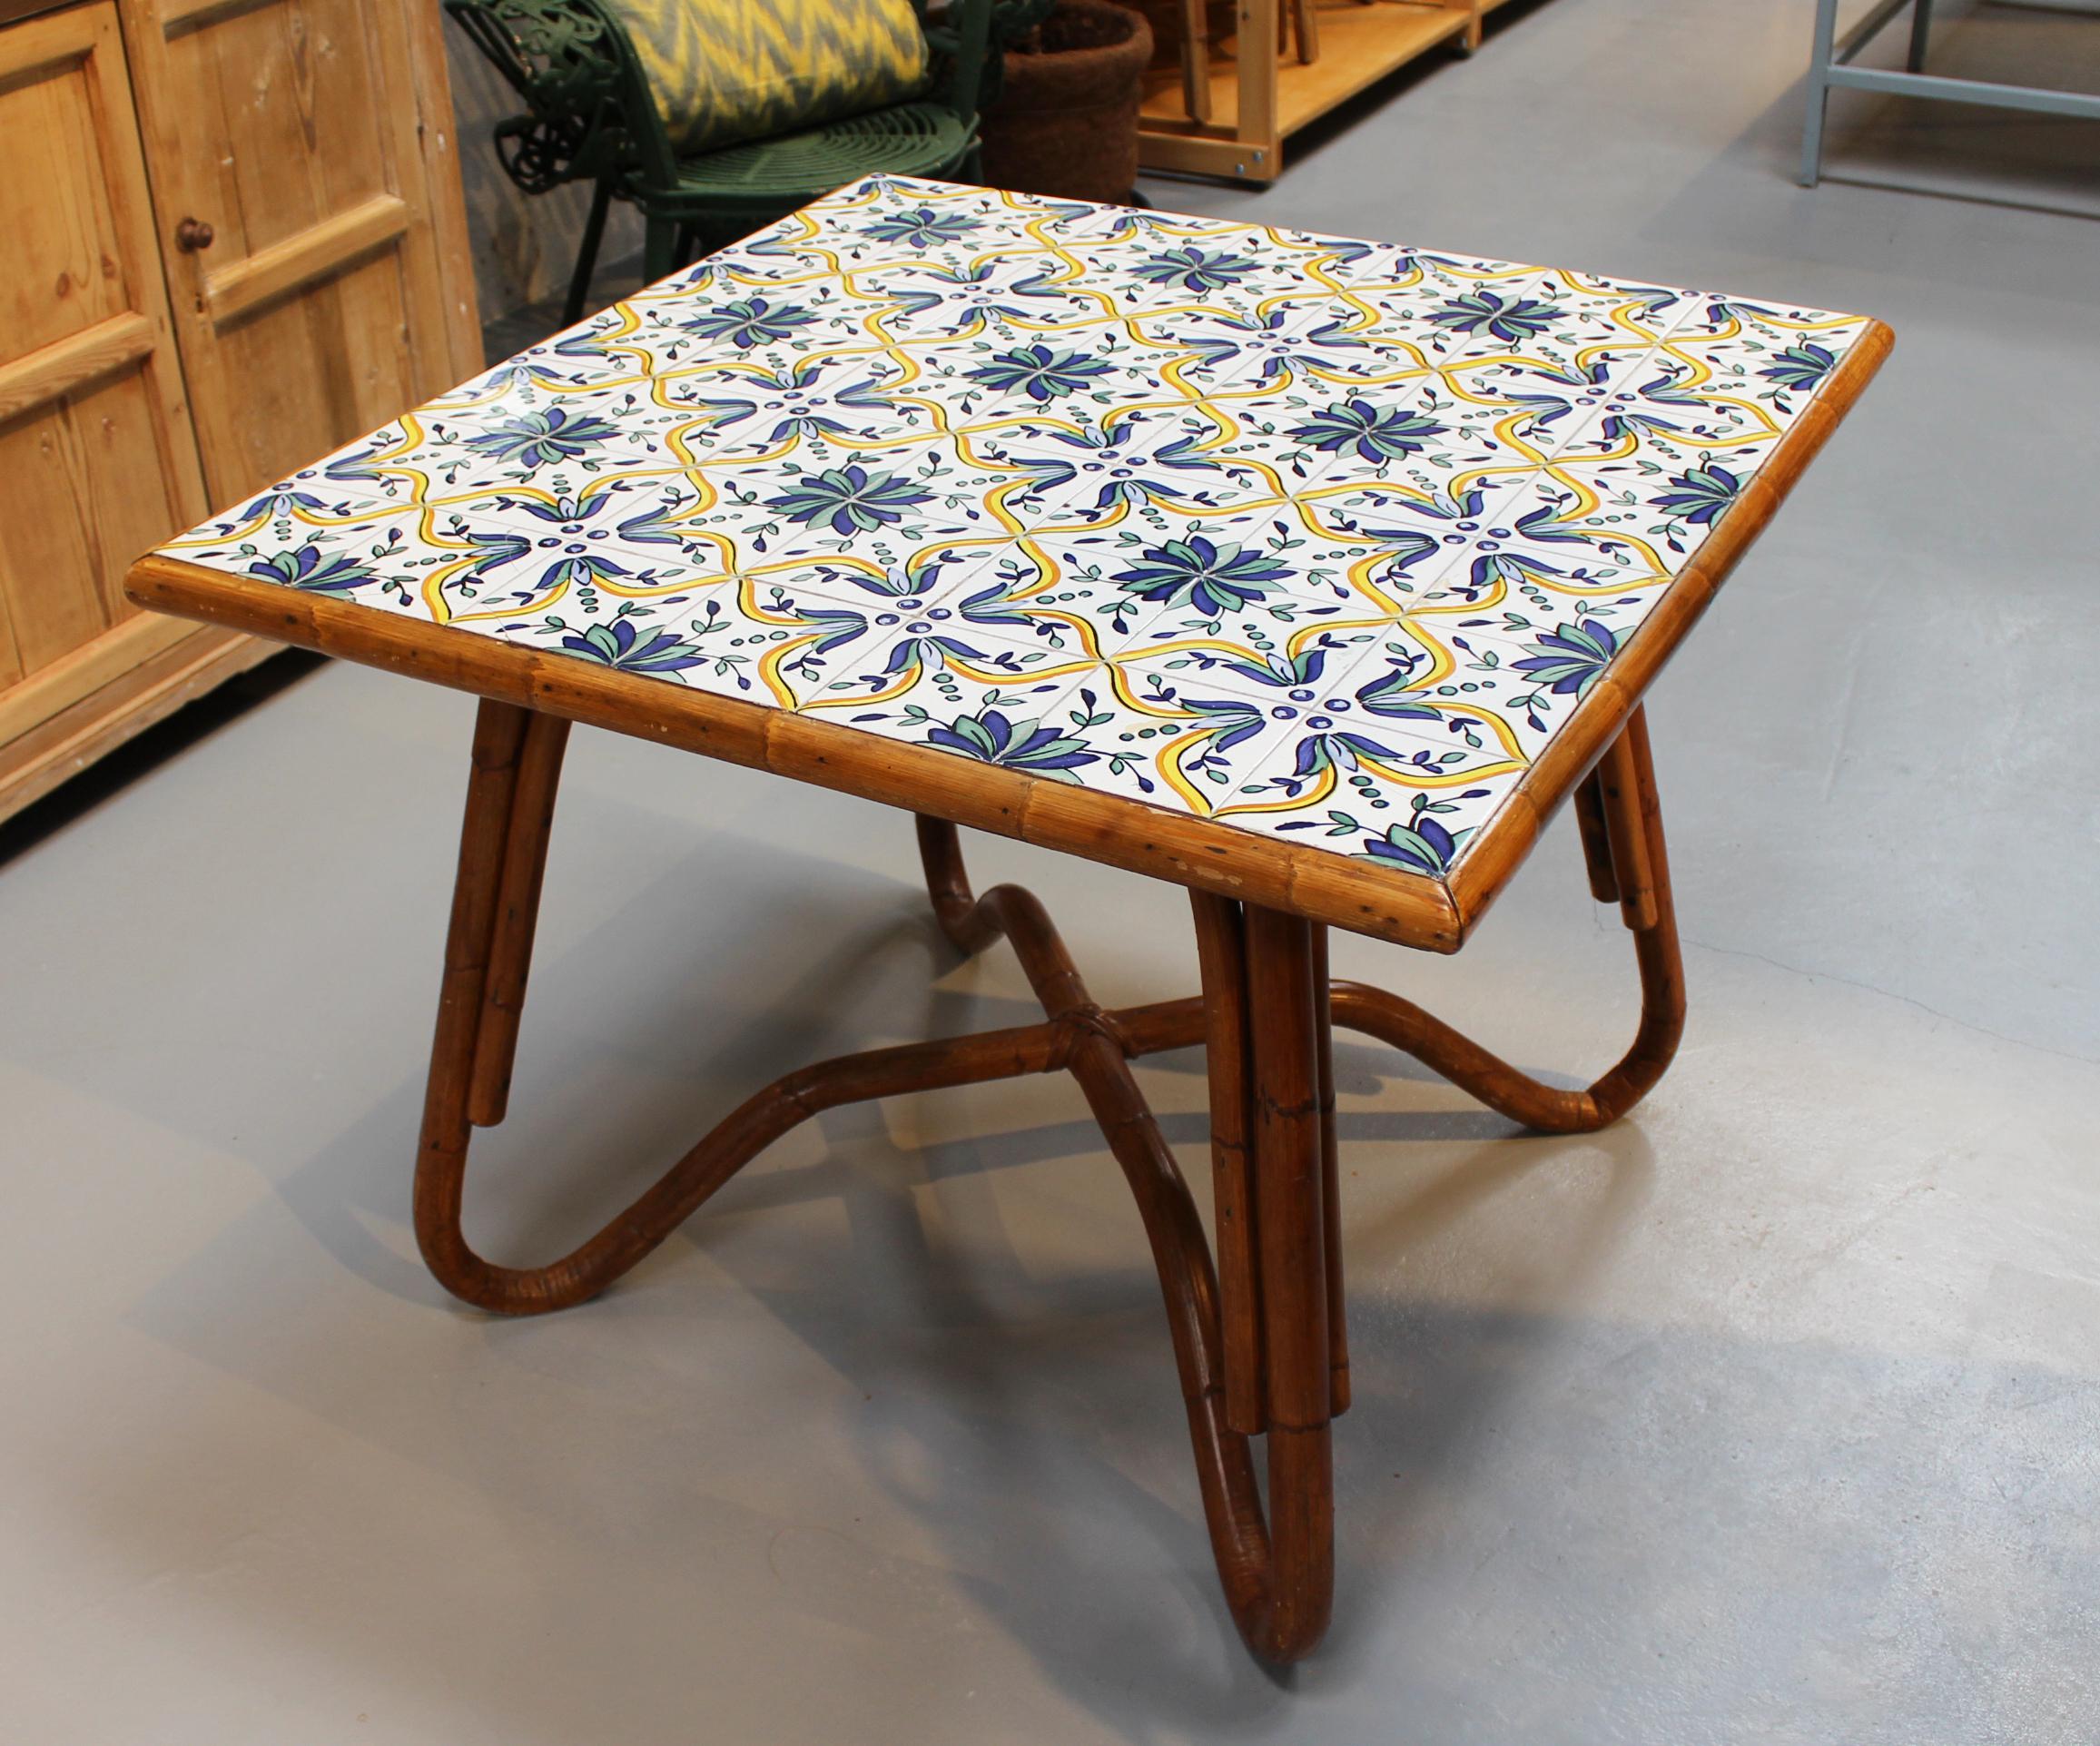 1980s squared bamboo and canework table with tiles.